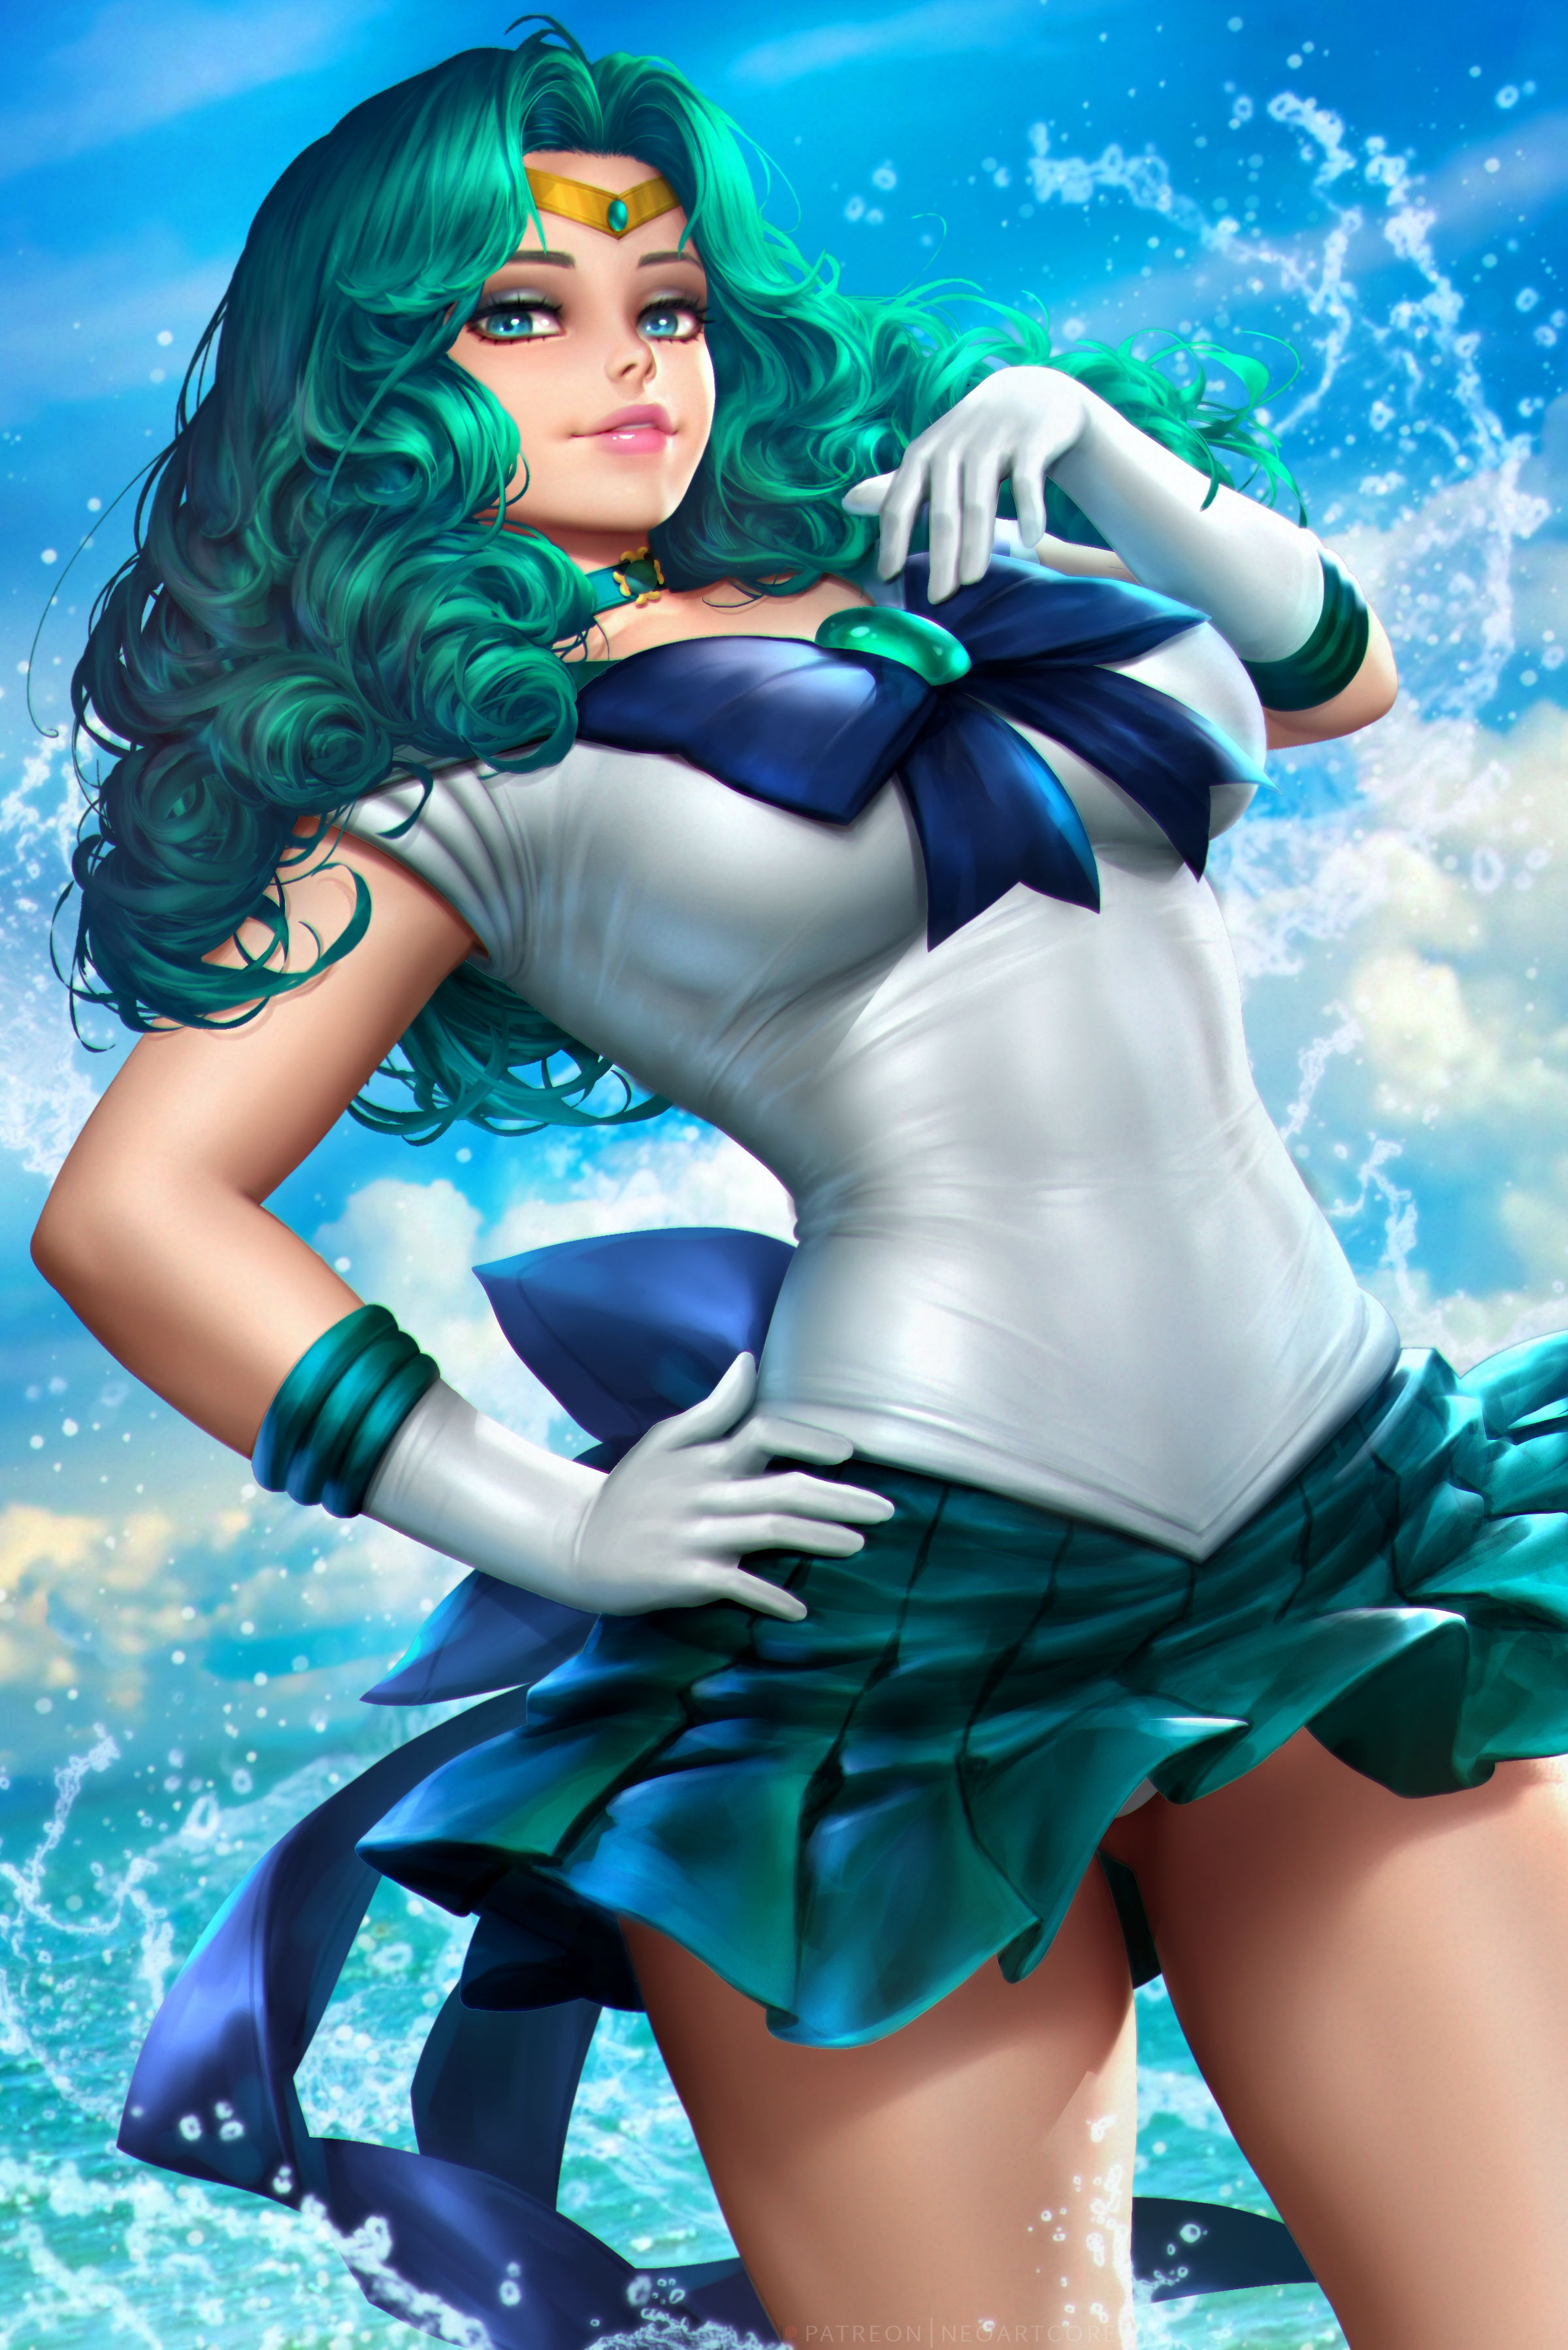 Anime 2400x3597 Sailor Neptune Sailor Moon anime anime girls turquoise hair turquoise eyes looking at viewer parted lips tiaras choker portrait display sailor uniform upskirt gloves splashes water clouds sky artwork drawing digital art illustration fan art NeoArtCorE (artist)